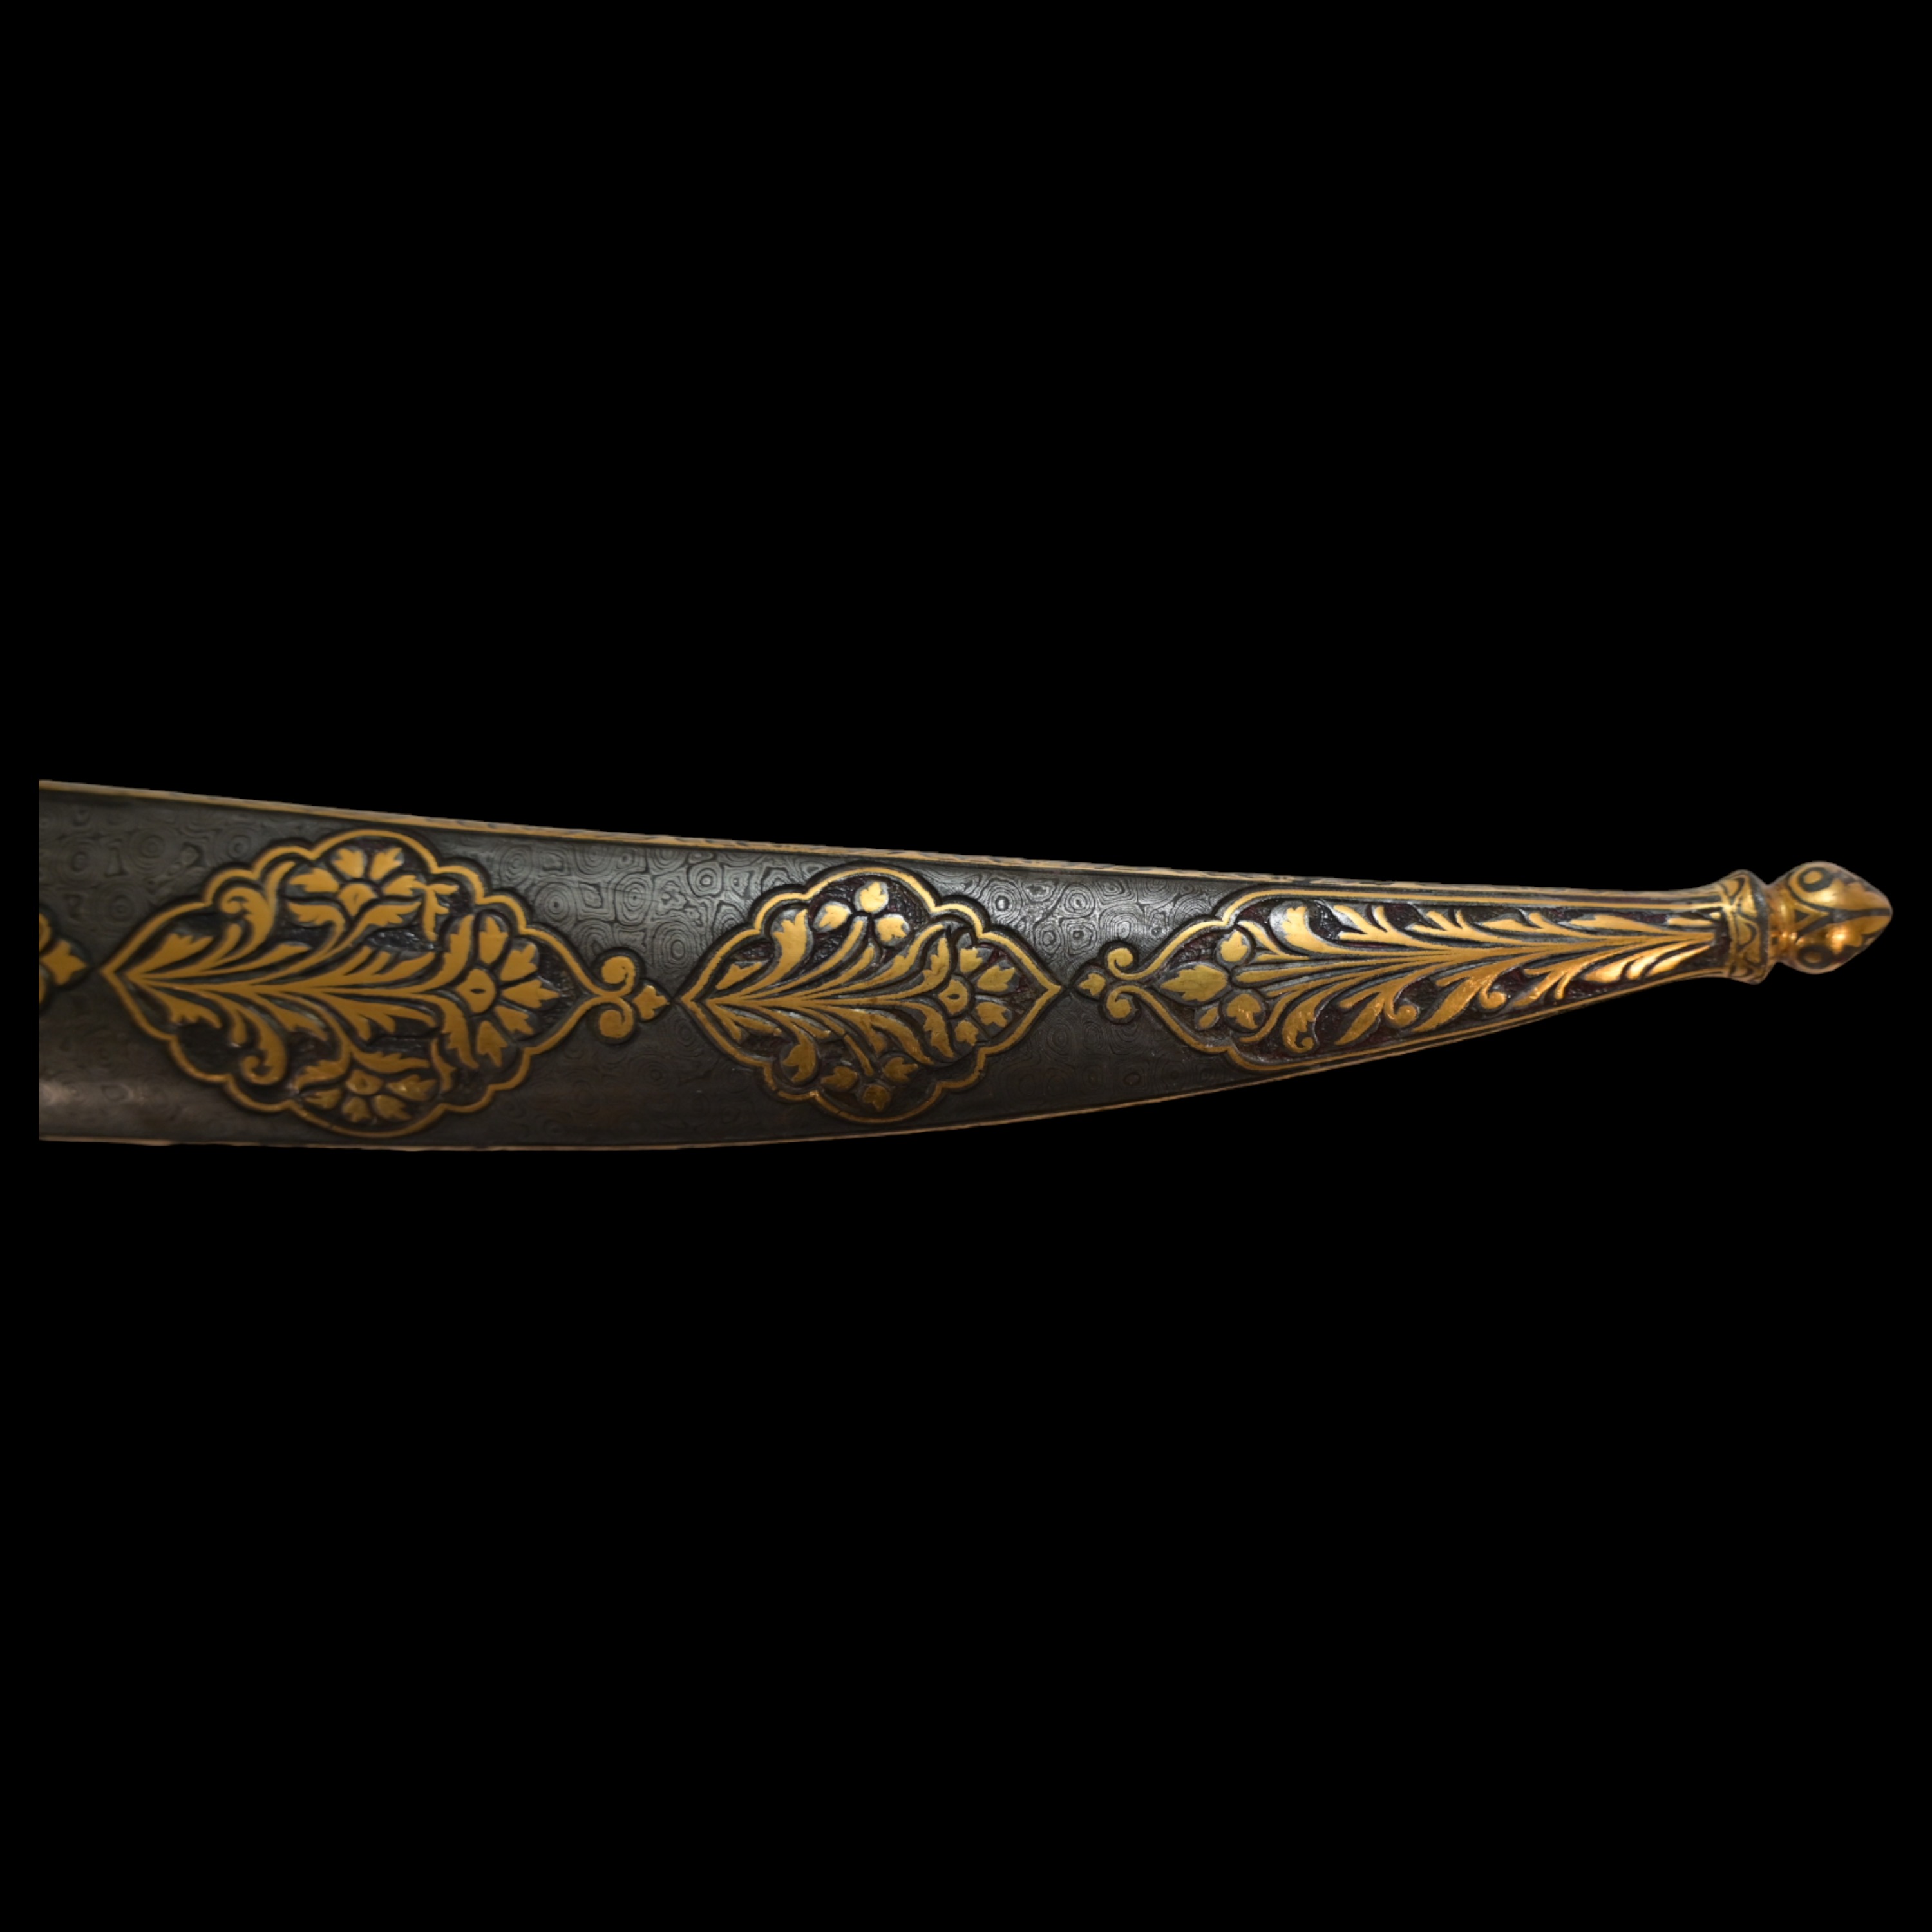 Richly decorated gold kofgari Indian dagger with wootz blade, 19th century. - Image 9 of 12